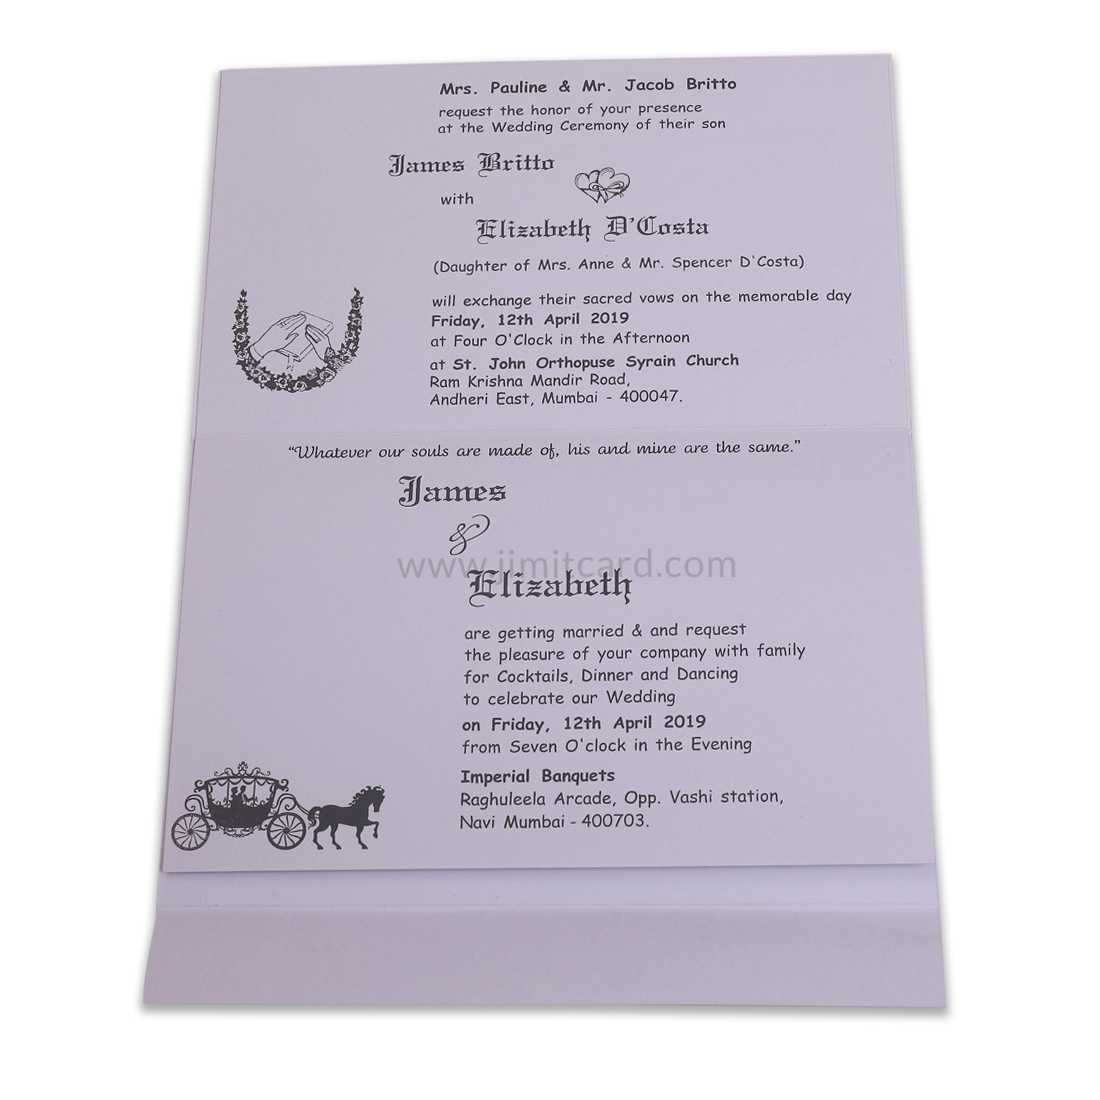 Ivory Color Wedding Invitation with floral Embedded Design and Bride and Groom-12672